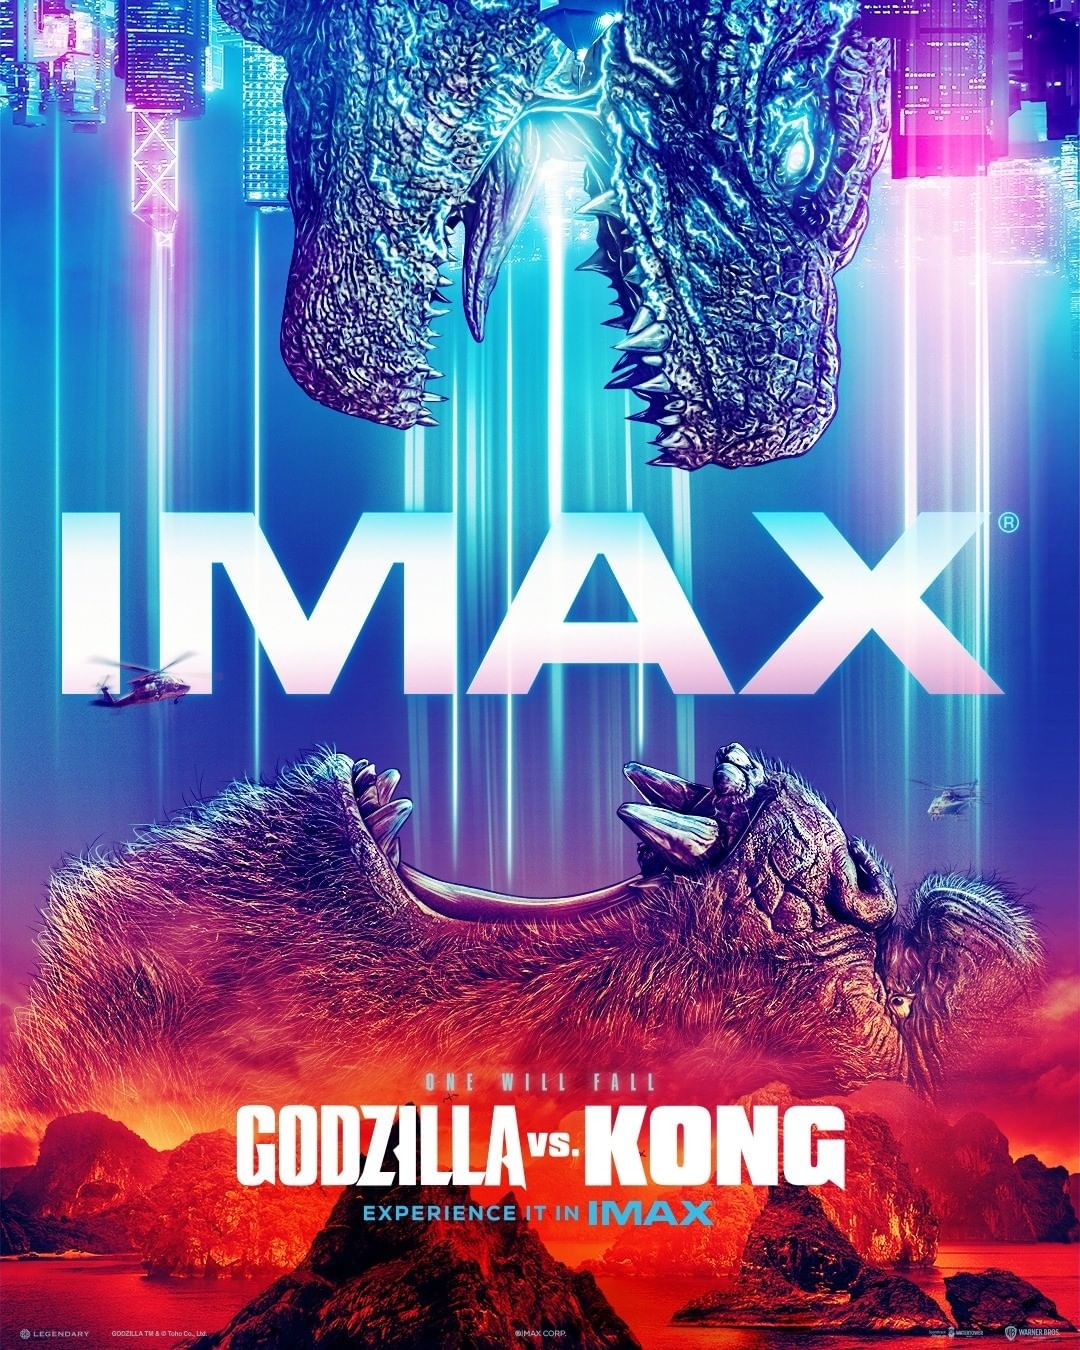 Extra Large Movie Poster Image for Godzilla vs. Kong (#11 of 20)